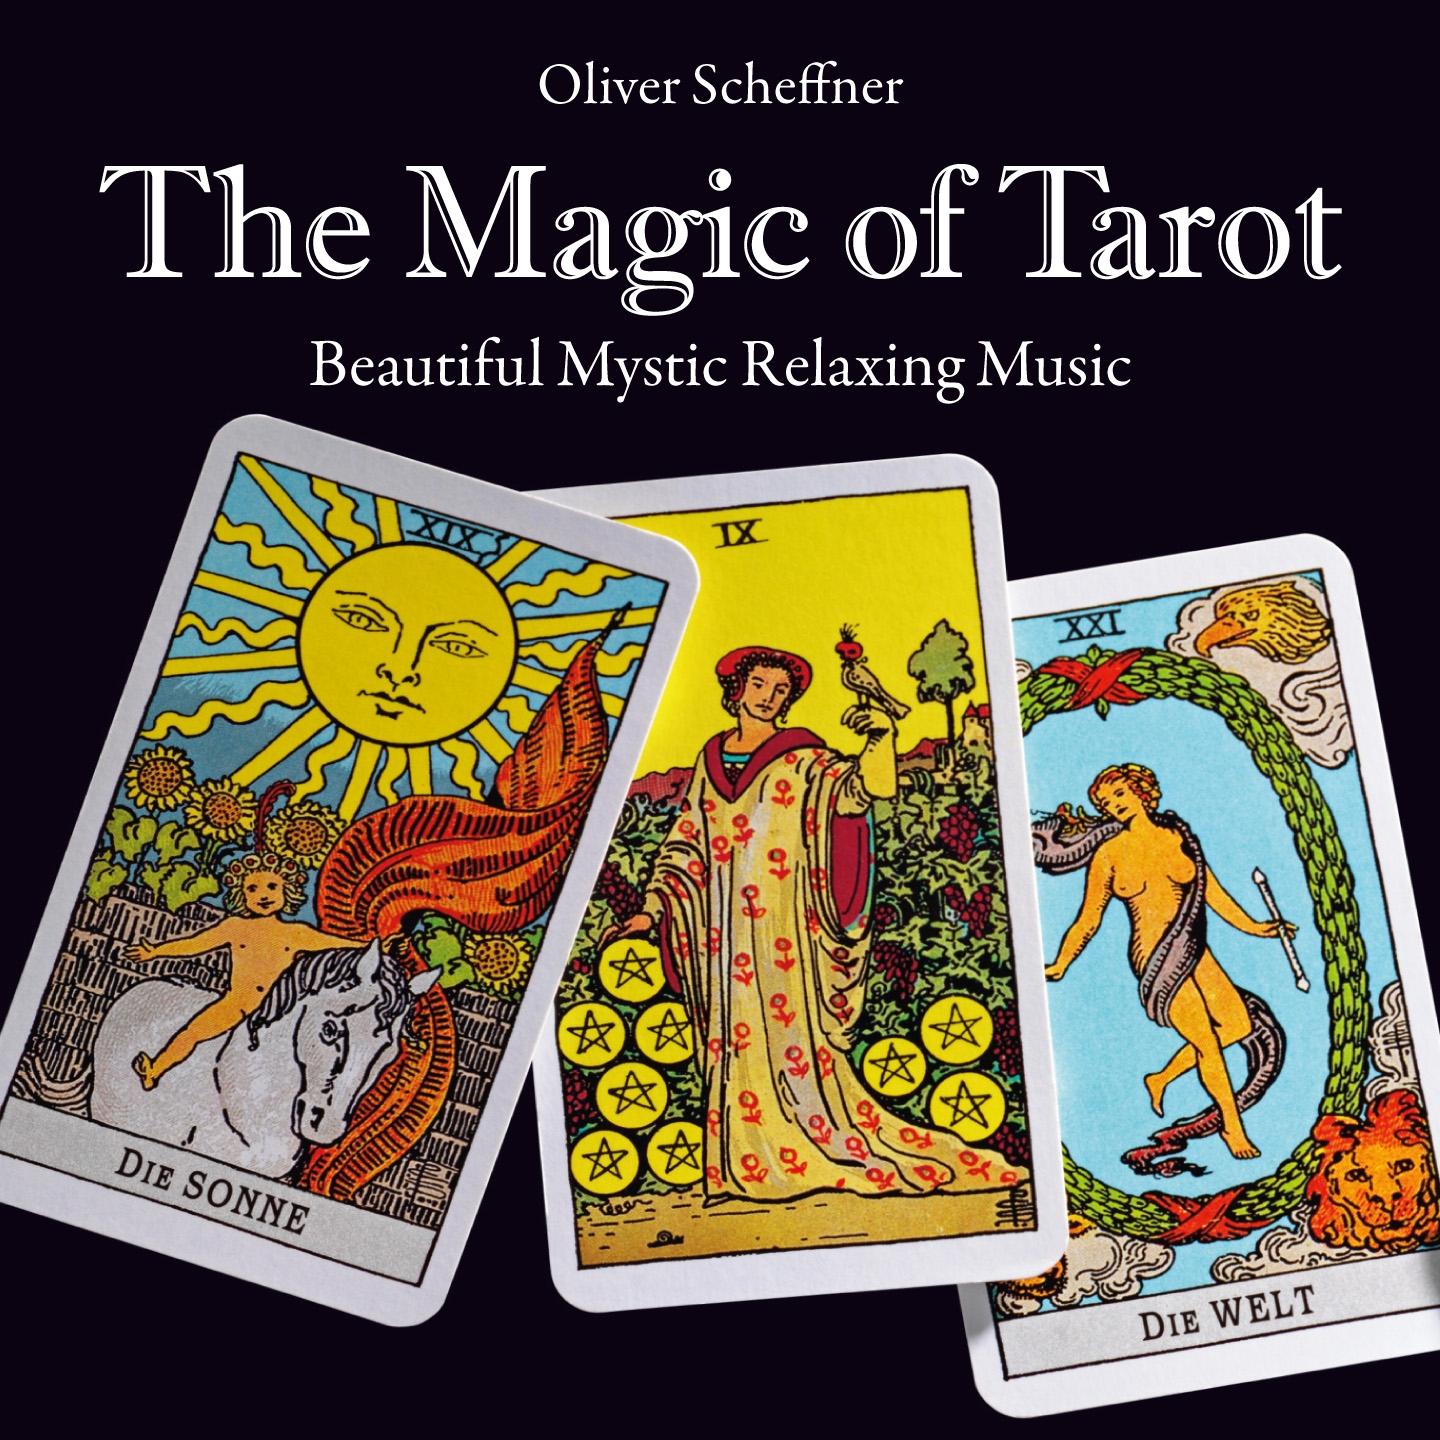 In the Sign of Tarot